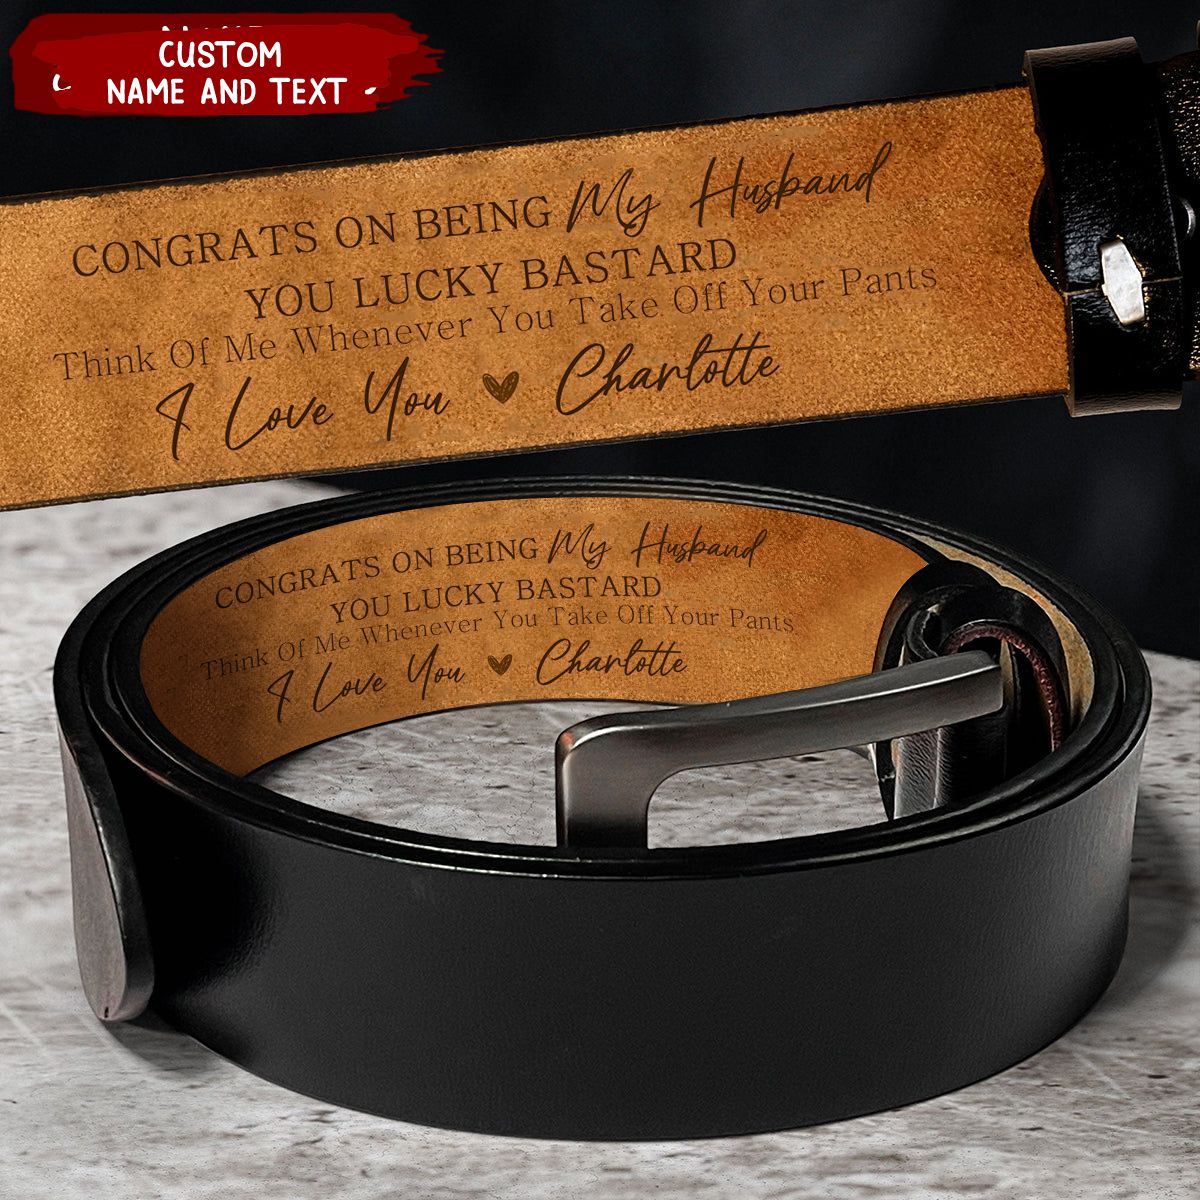 Personalized Congrats On Being My Husband/ Boyfriend Engraved Leather Belt